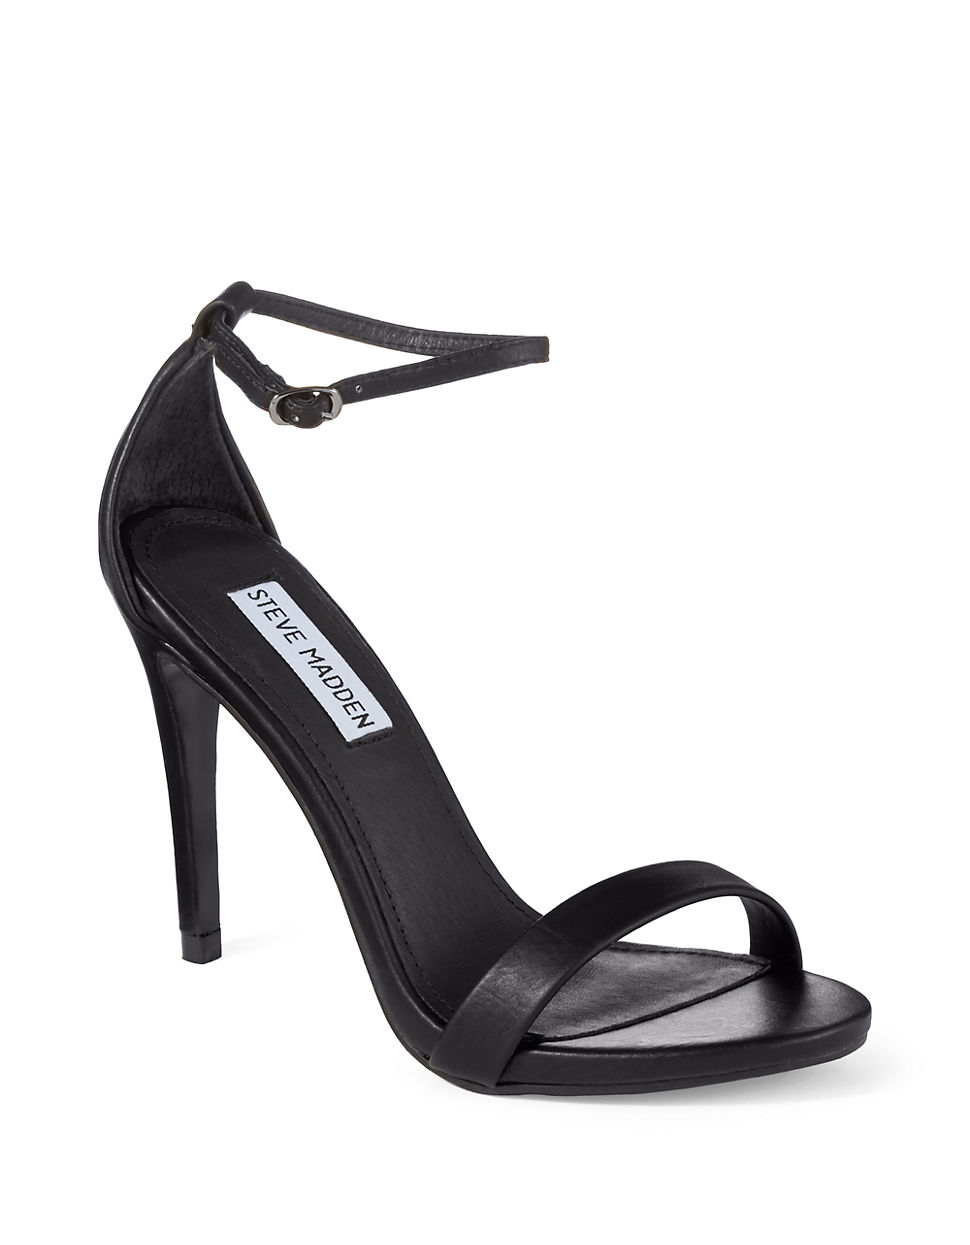 Steve Madden Stecy Strappy Sandals in Black - Lyst